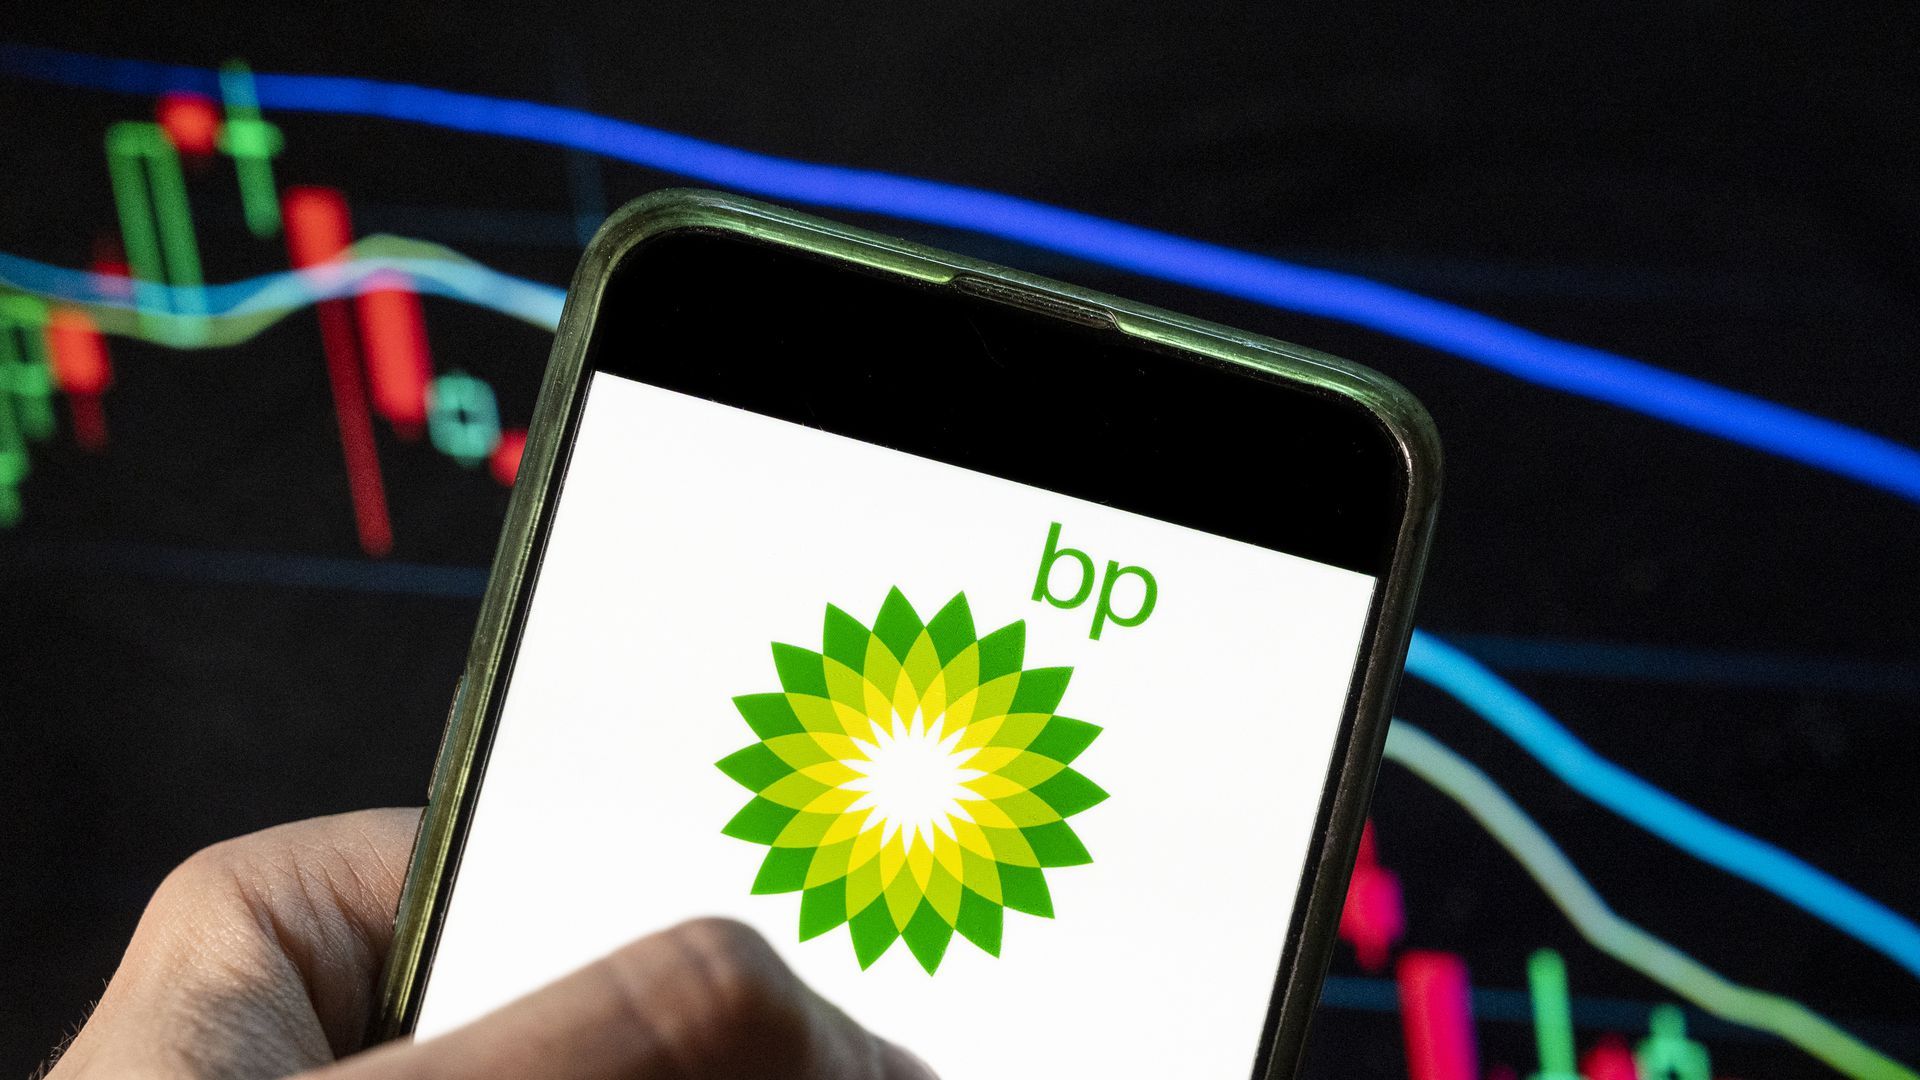 Picture of a smartphone screen with the BP logo